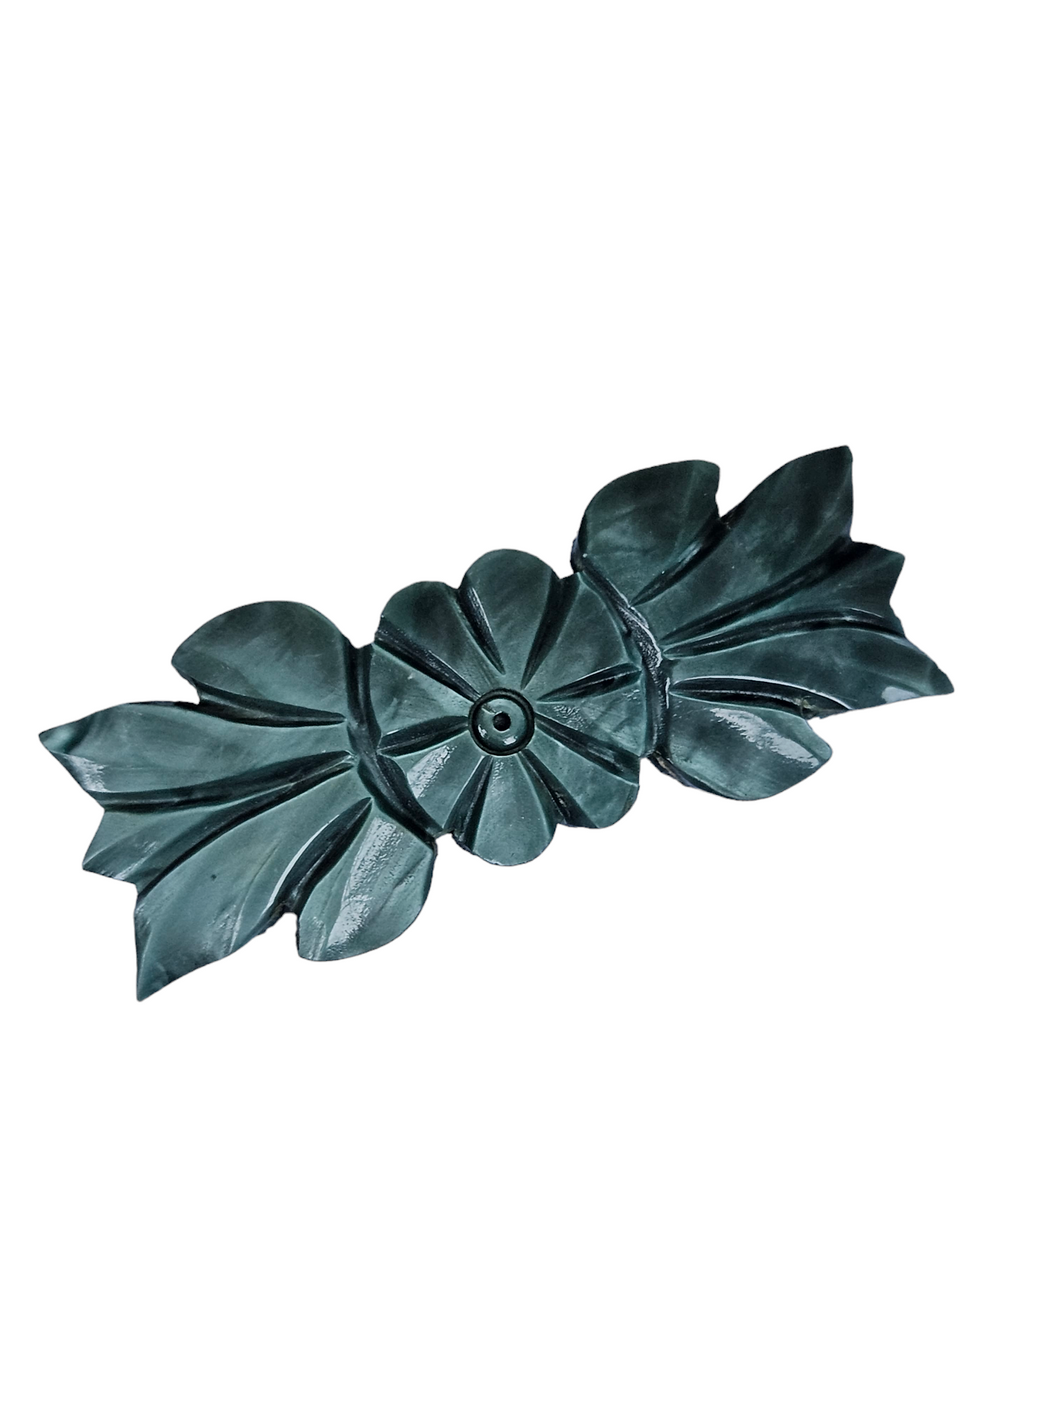 1940s Dusky Blue Carved Marbled Galalith Flower Brooch